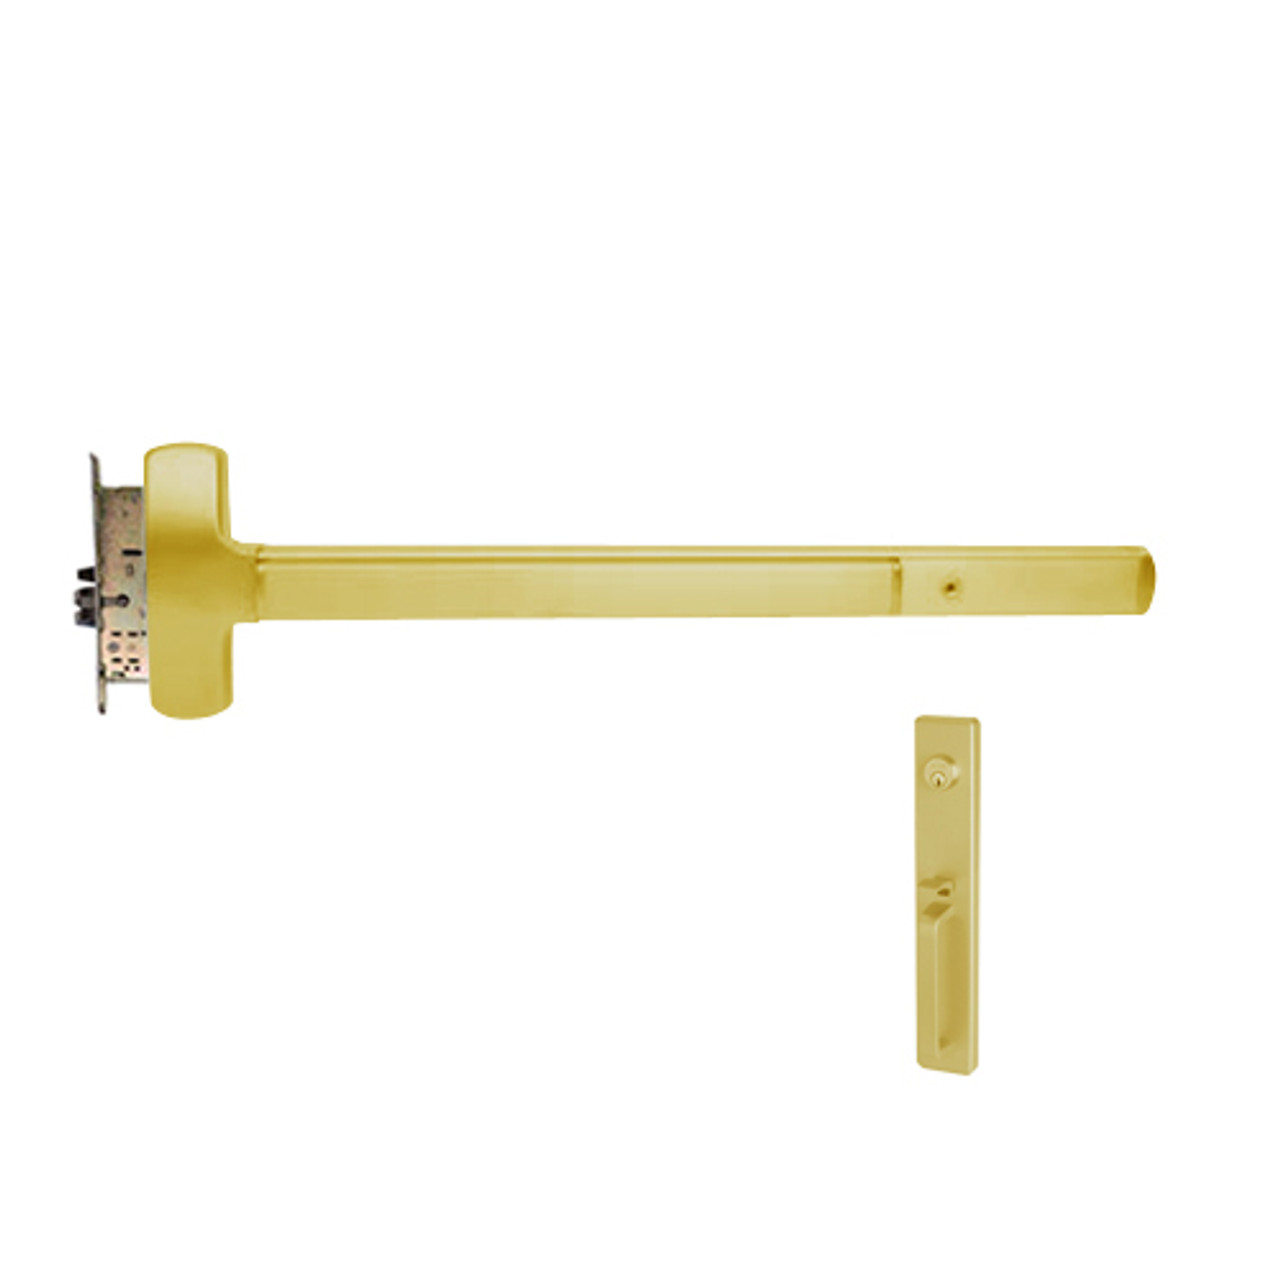 25-M-TP-US3-4-LHR Falcon Exit Device in Polished Brass